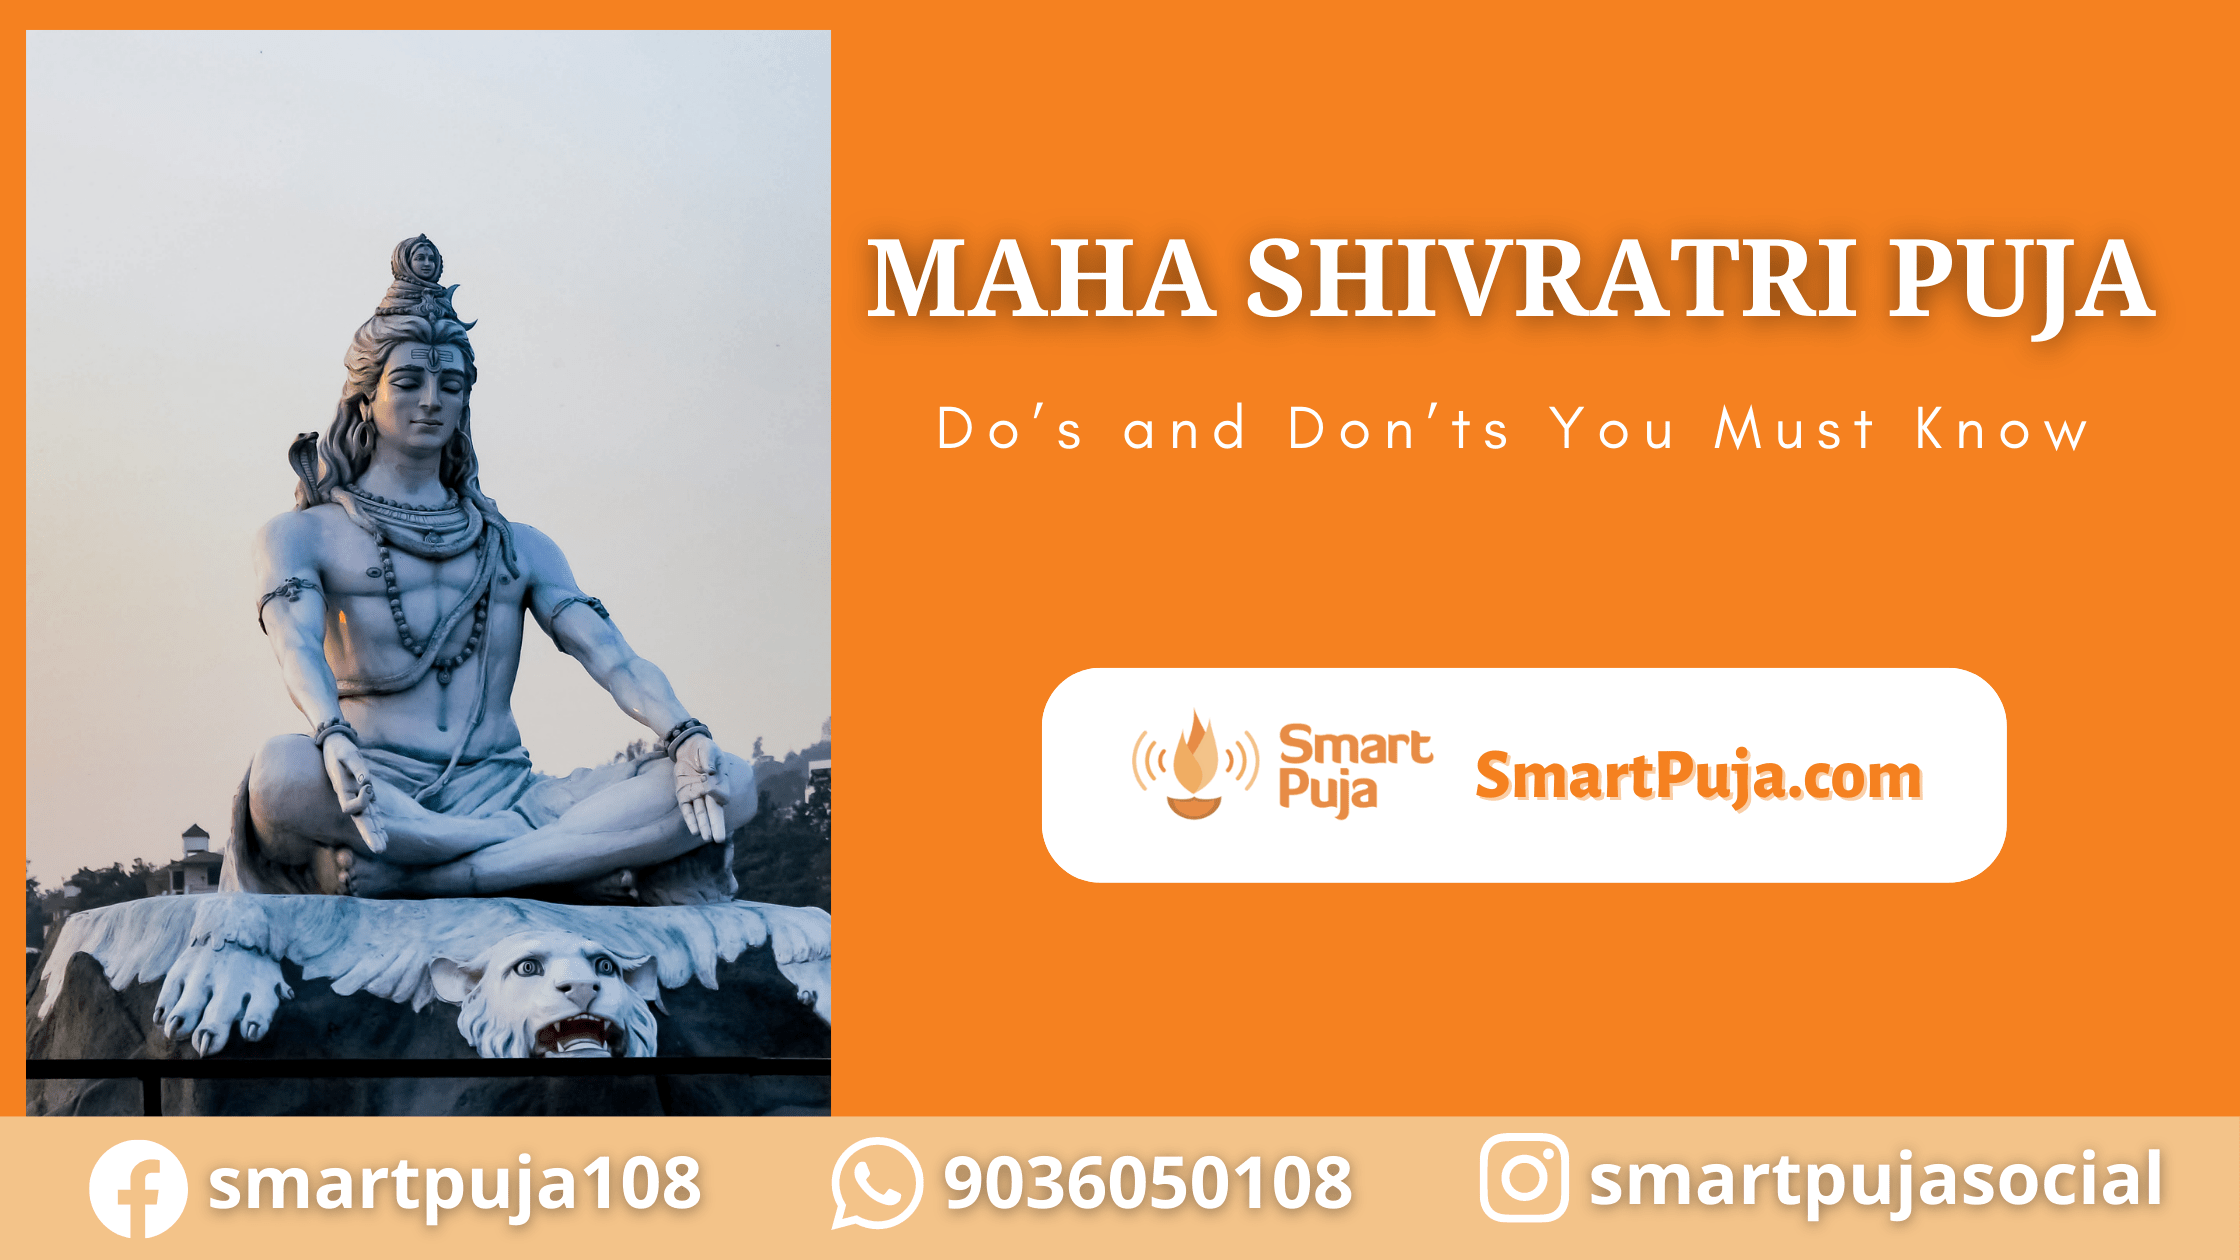 Maha Shivratri Puja Do’s and Don’ts You Must Know